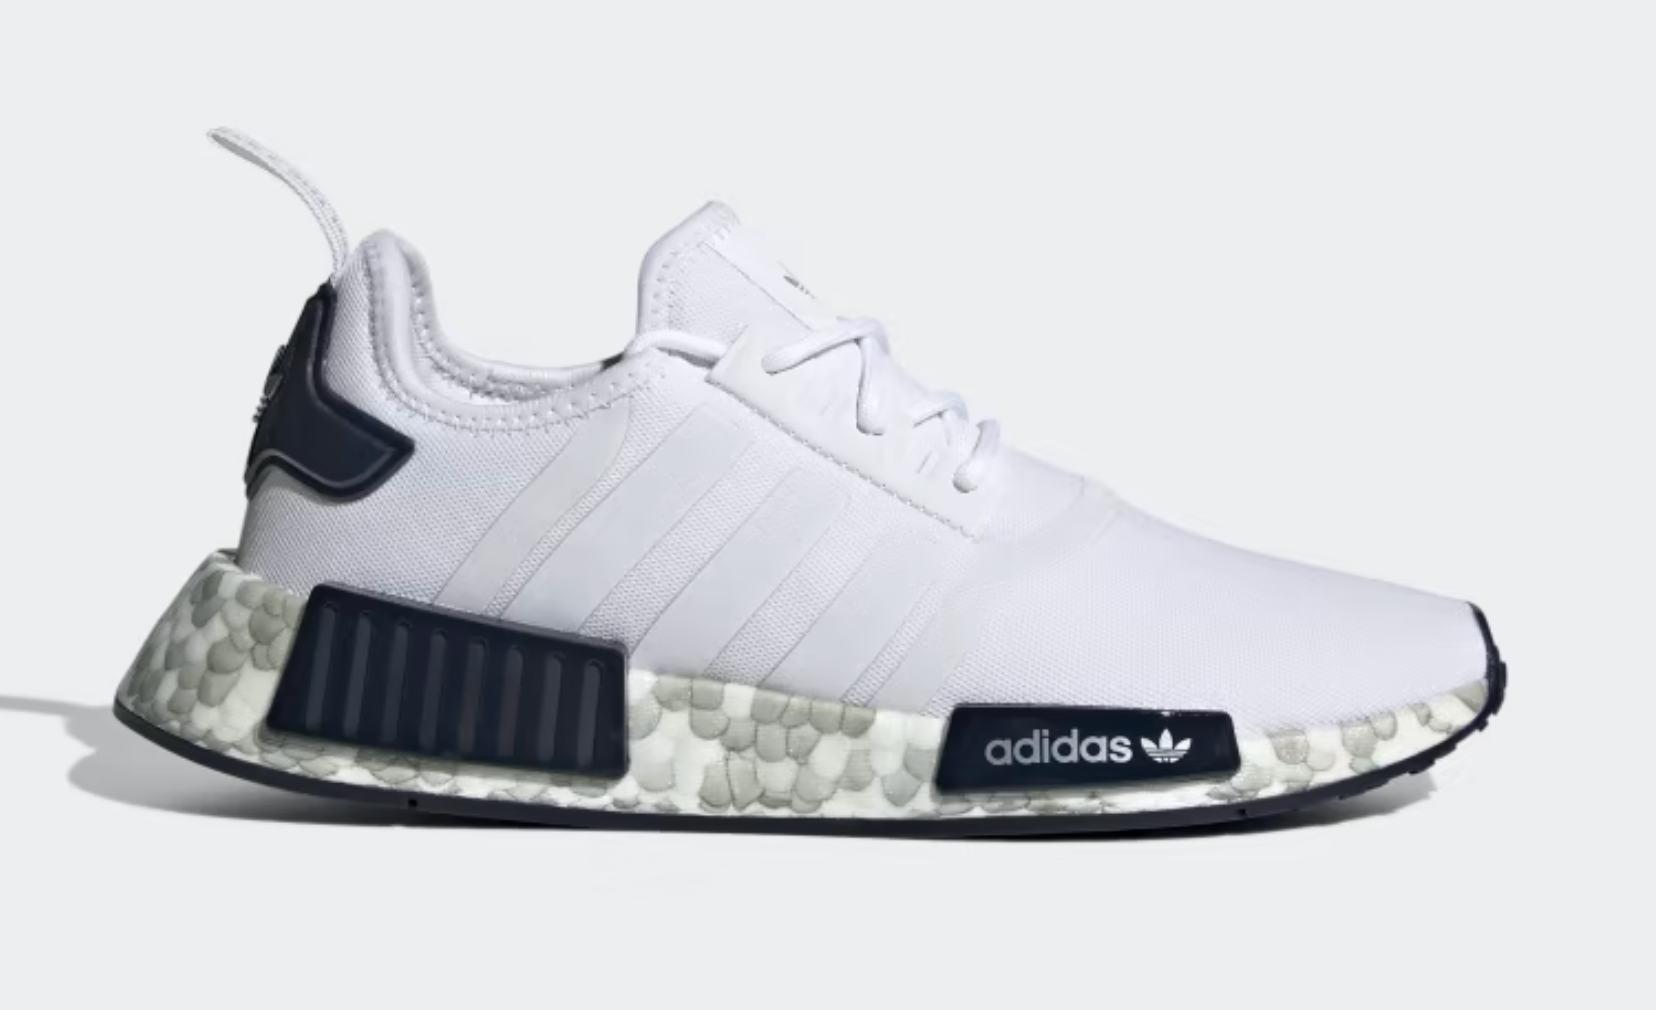 Adidas NMD_R1 Womens Shoes (Cloud White / Magic Grey / Legend Ink)